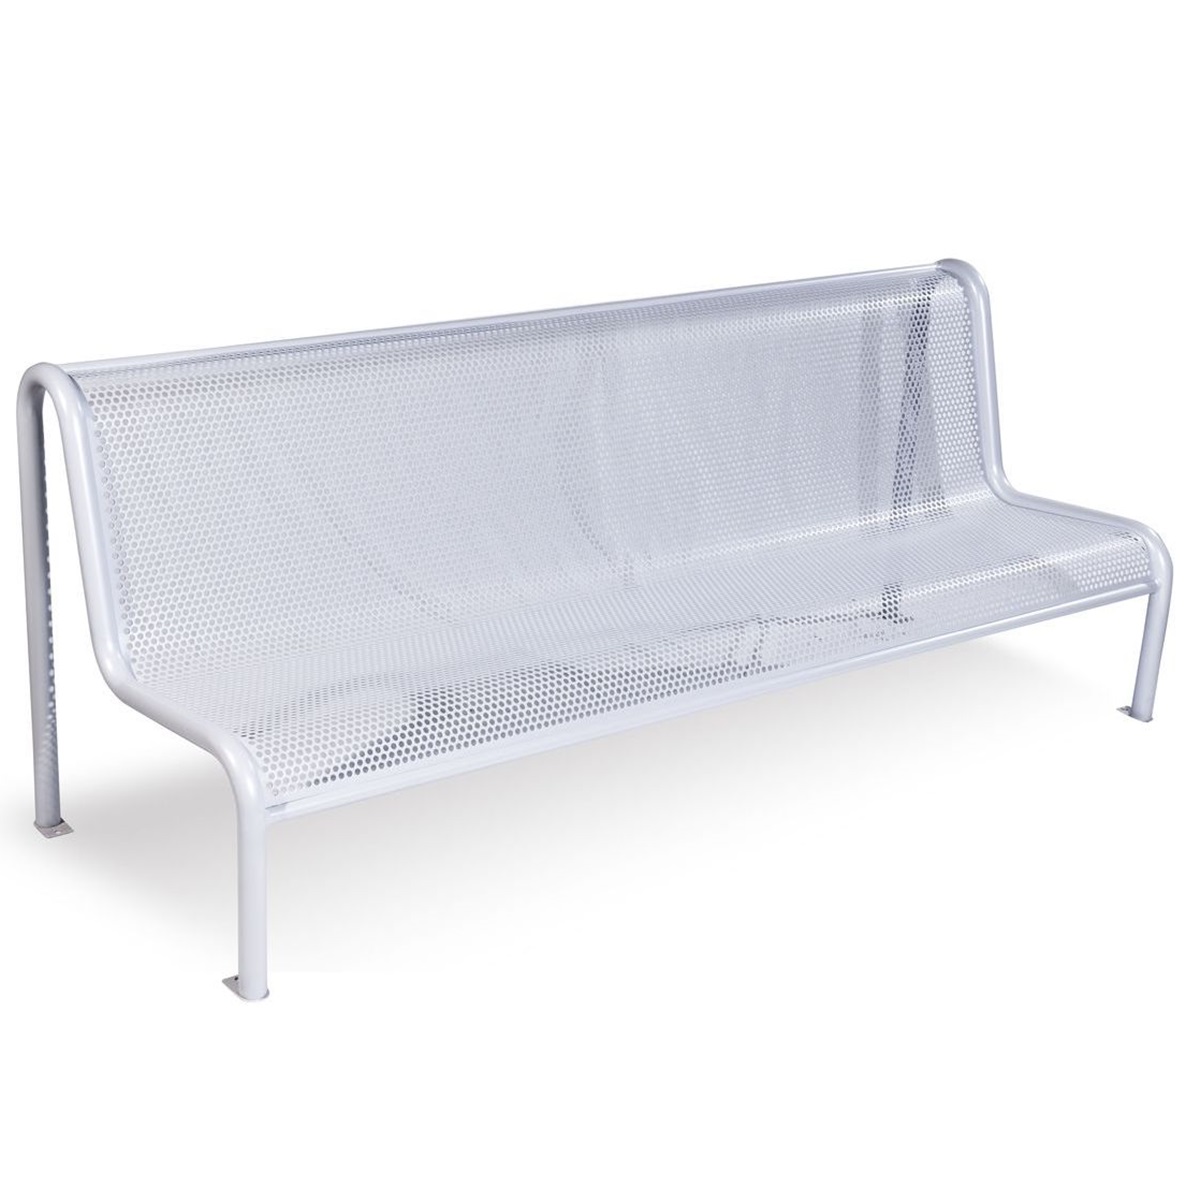 Perforated metal Plate Bench C-8 icon image